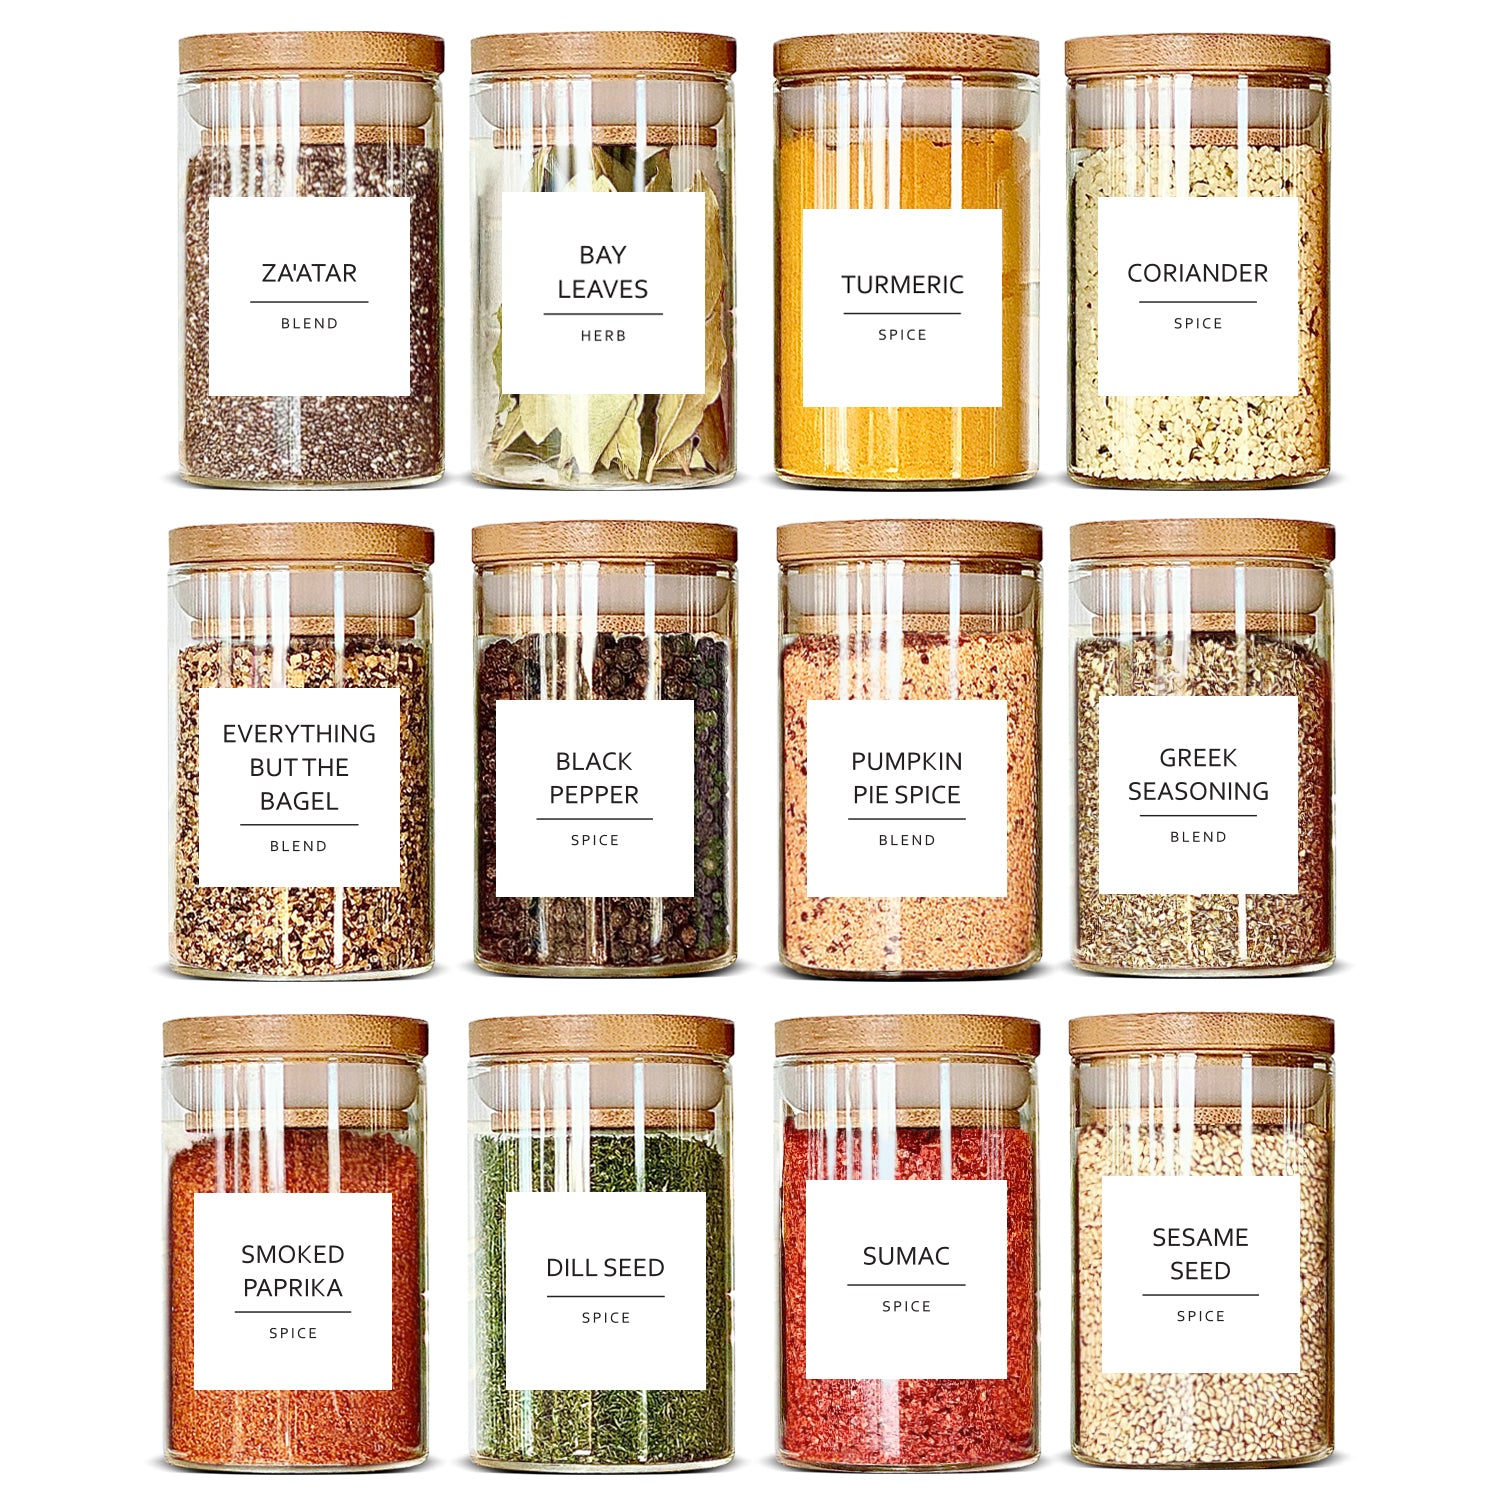 Talented Kitchen 125 Spice Labels Stickers, Clear Spice Jar Labels  Preprinted for Seasoning Herbs, Kitchen Spice Rack Organization, Water  Resistant